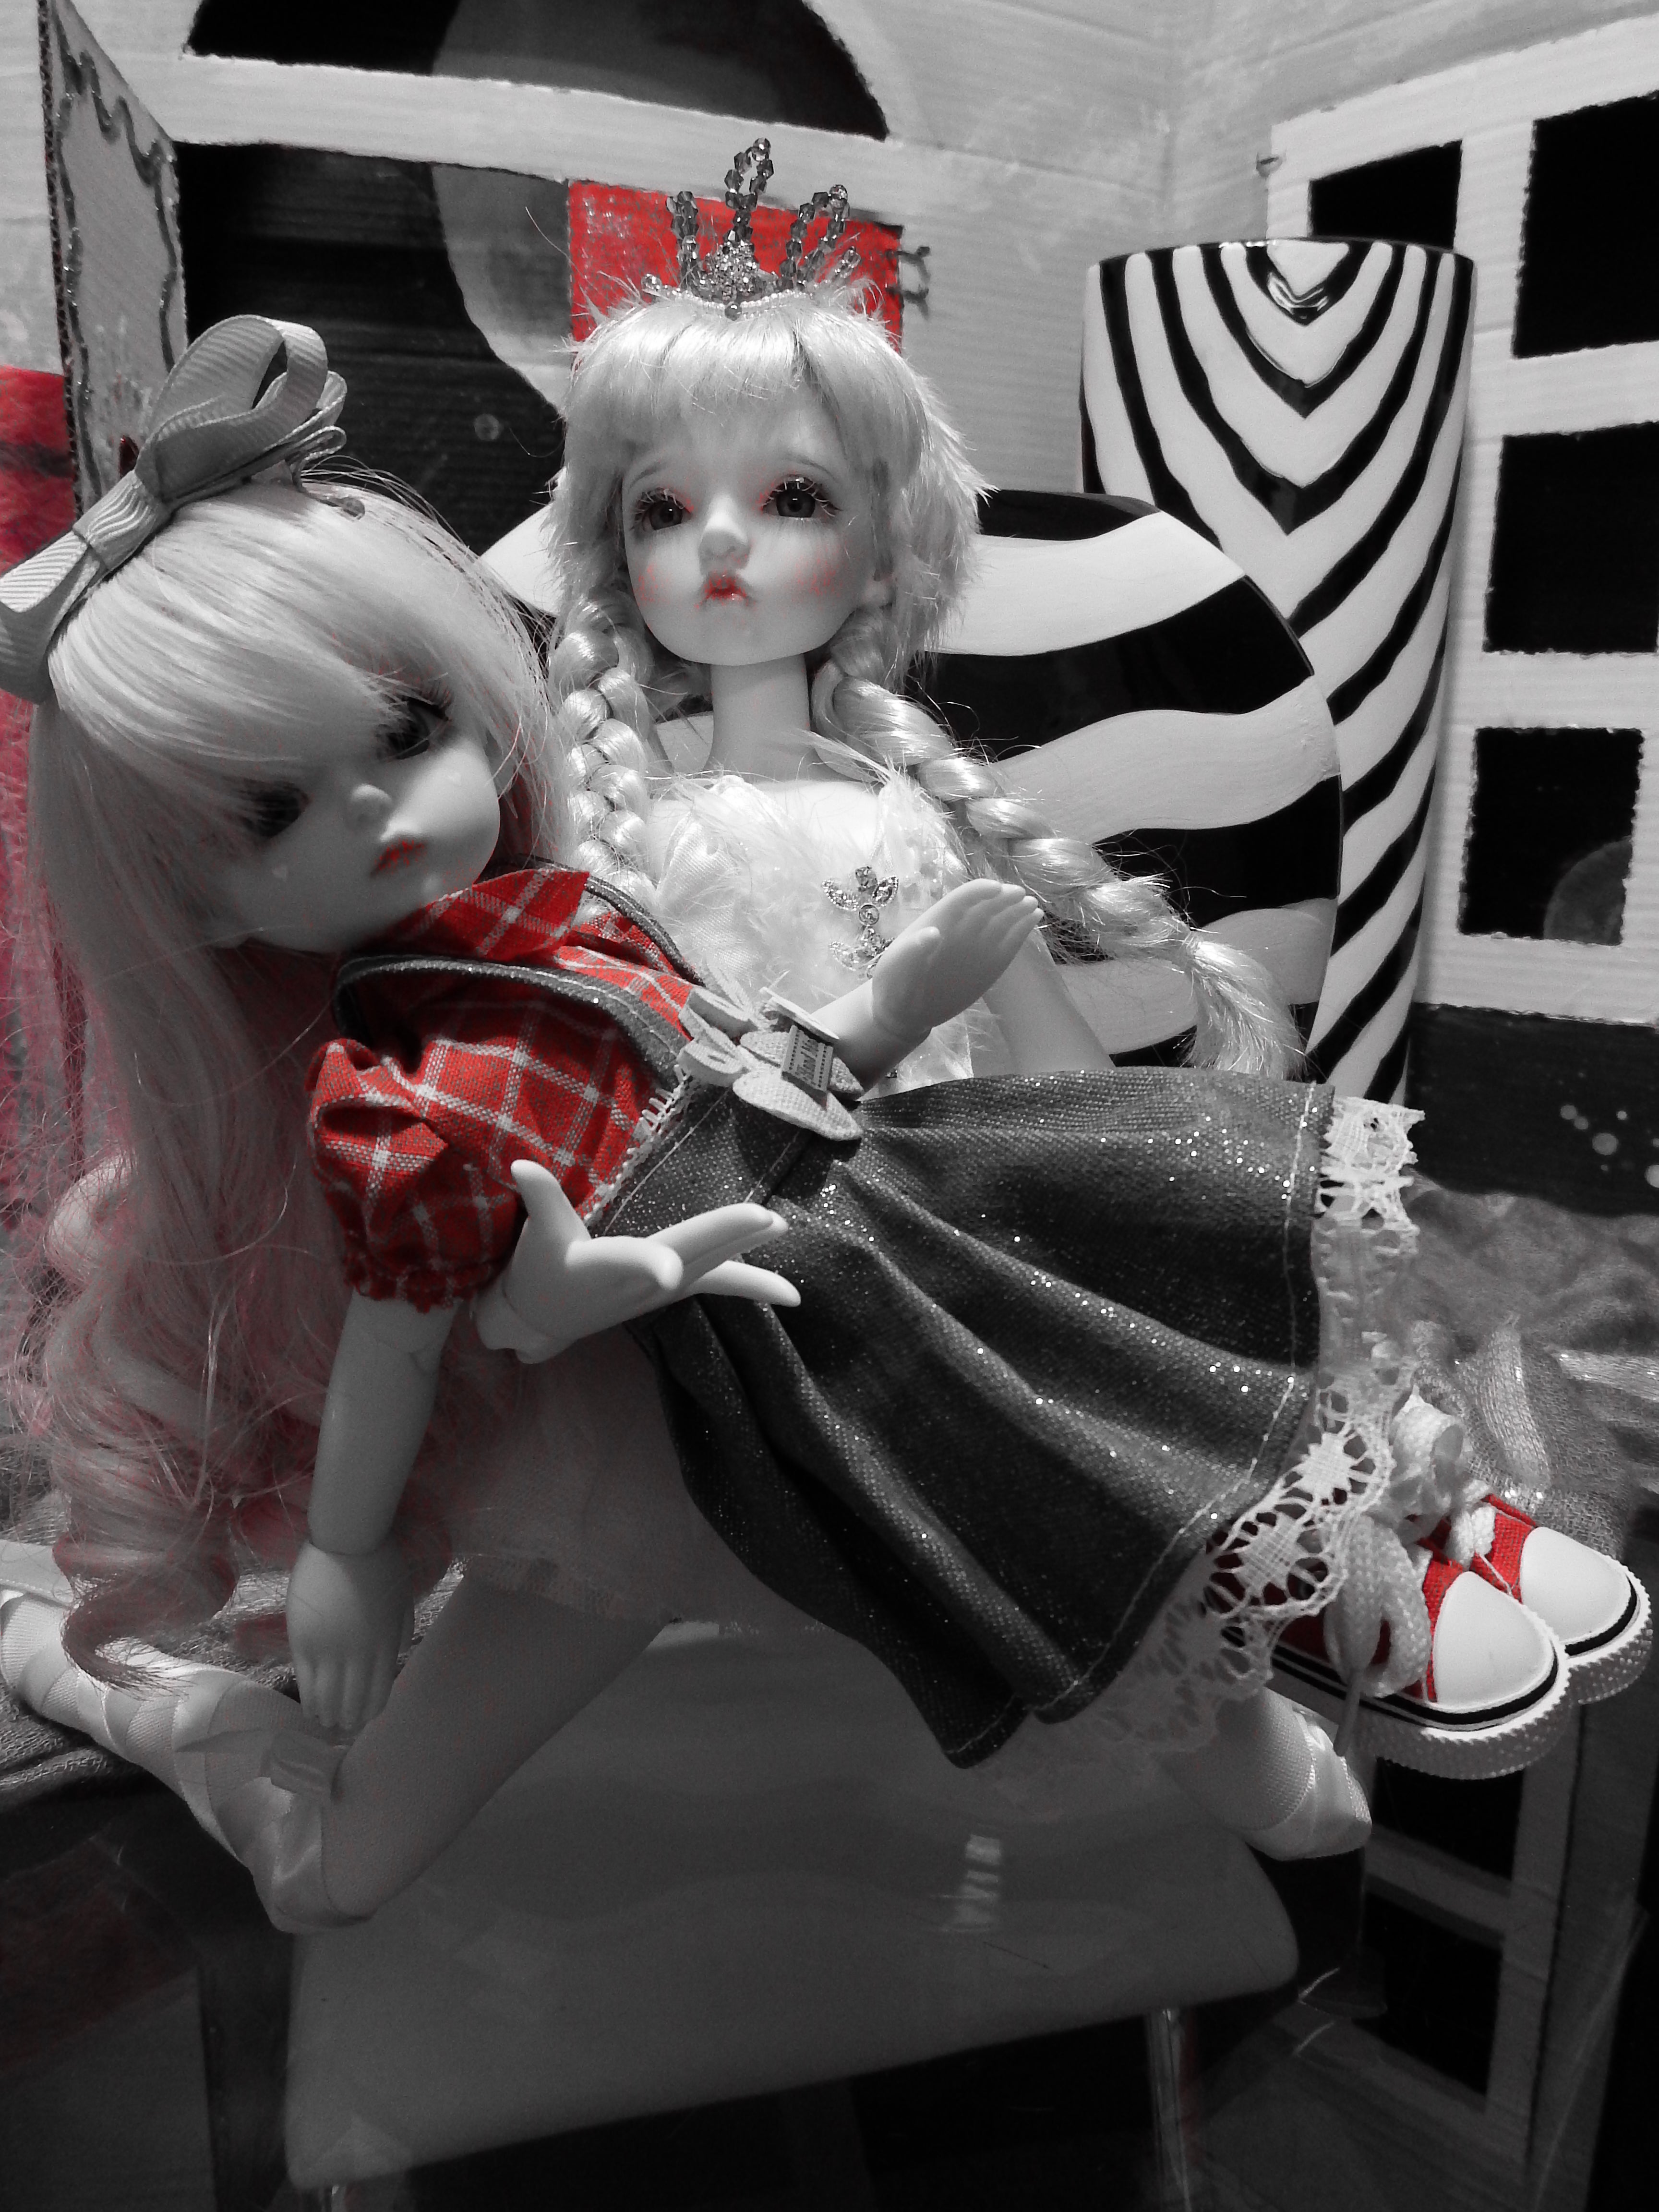 artsy sister, ball jointed doll, monochrome photos